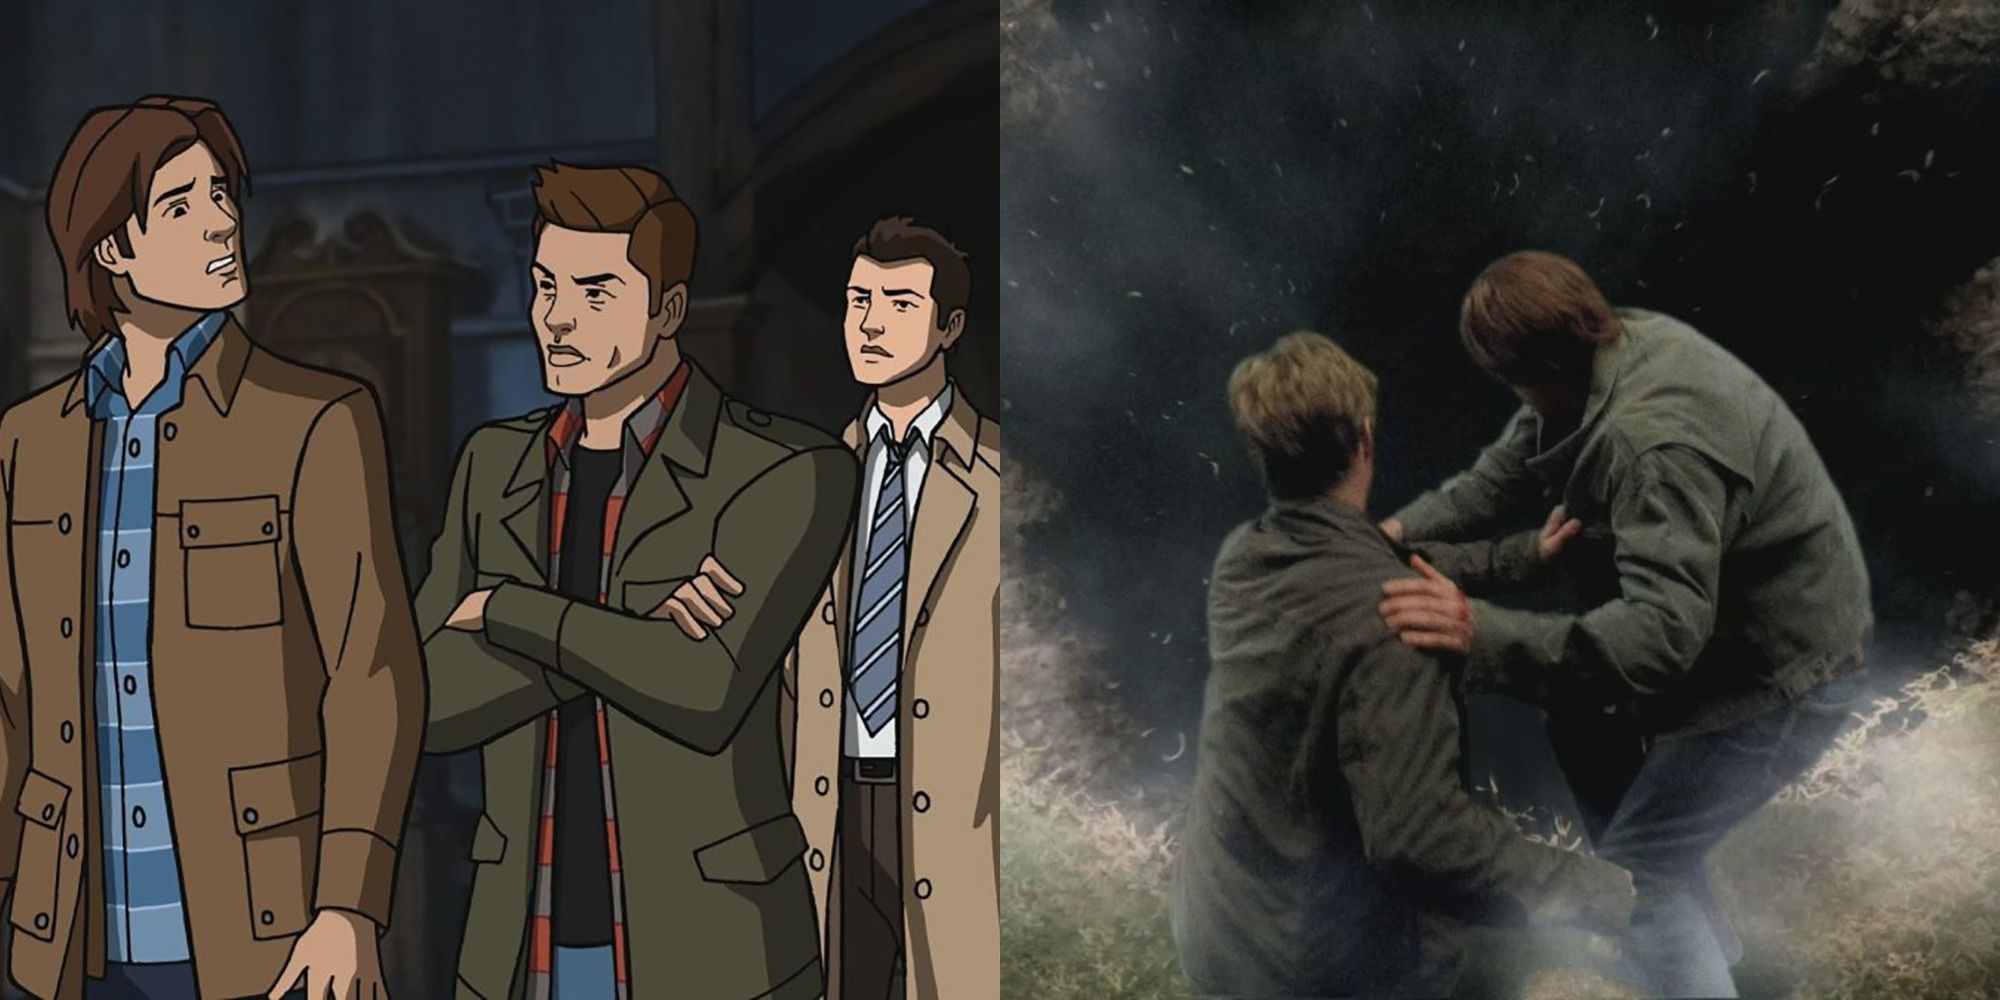 Split image showing Sam, Dean, and Castiel as cartoons and Sam and another man in Supernatural